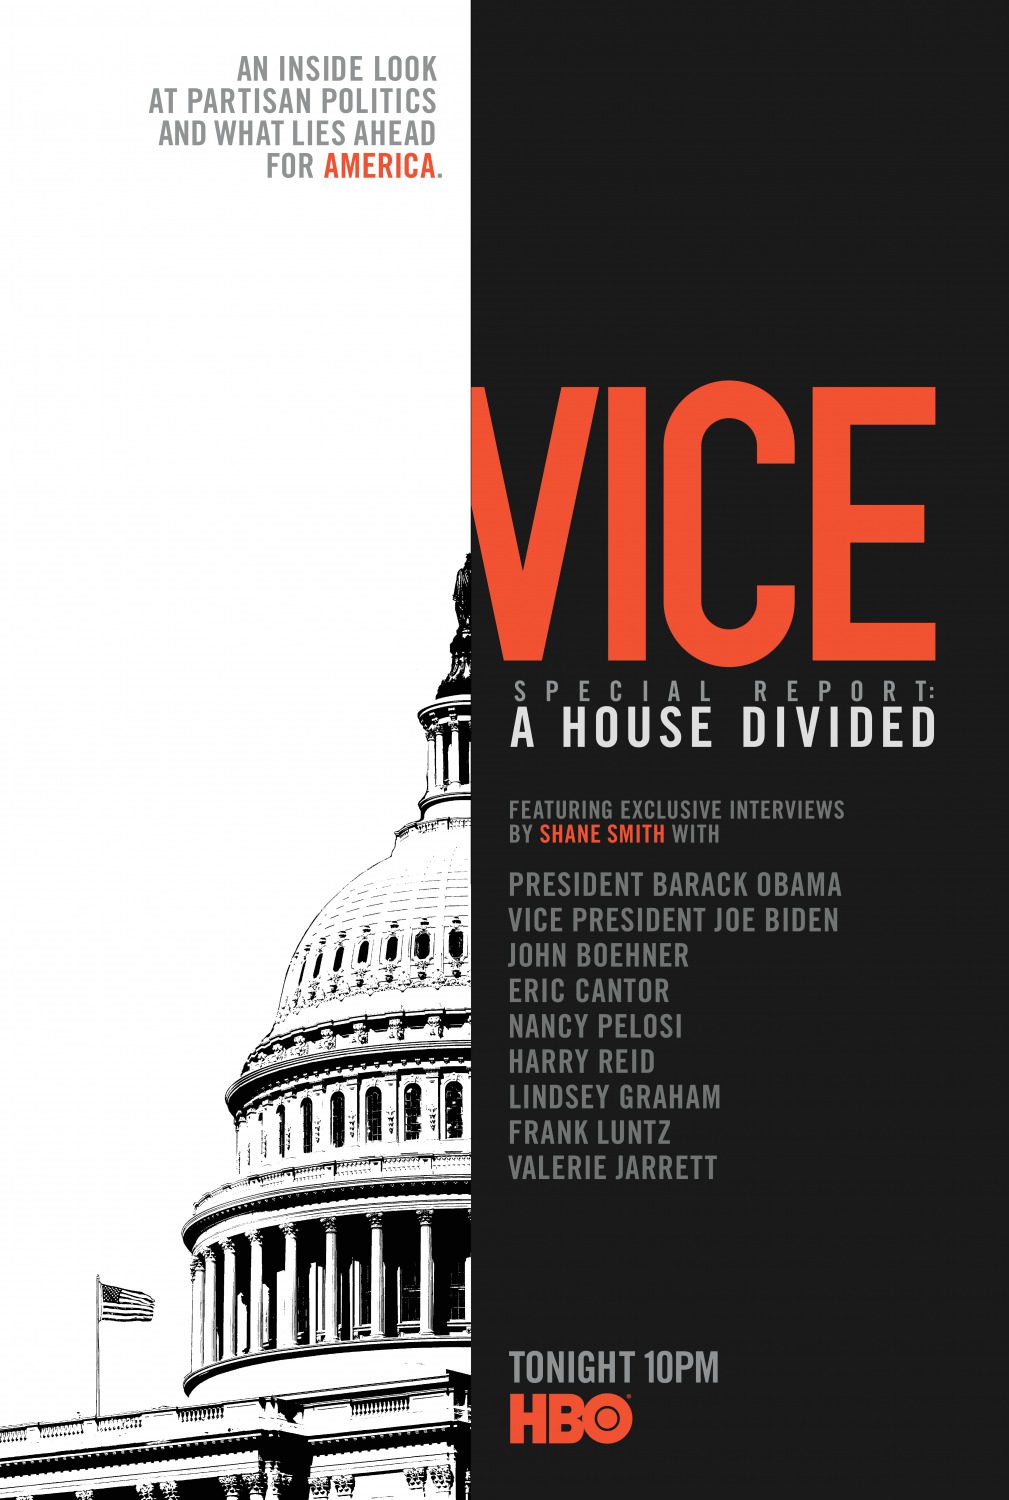 Extra Large TV Poster Image for VICE Special Report: A House Divided 